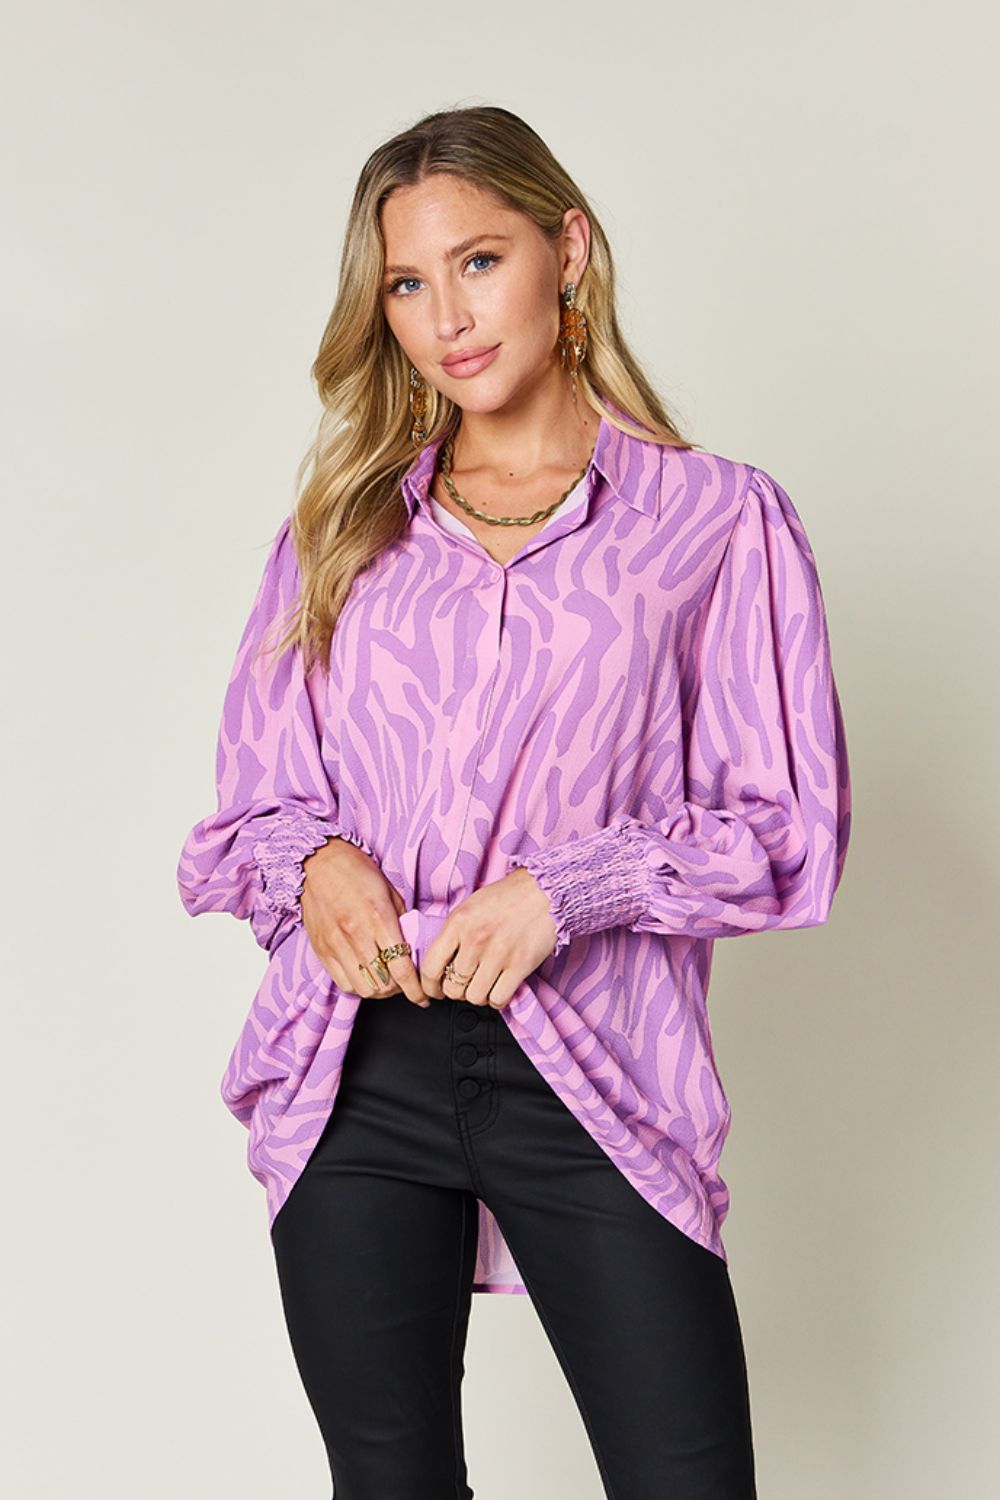 Changing Stripes Blouse *4 colors*